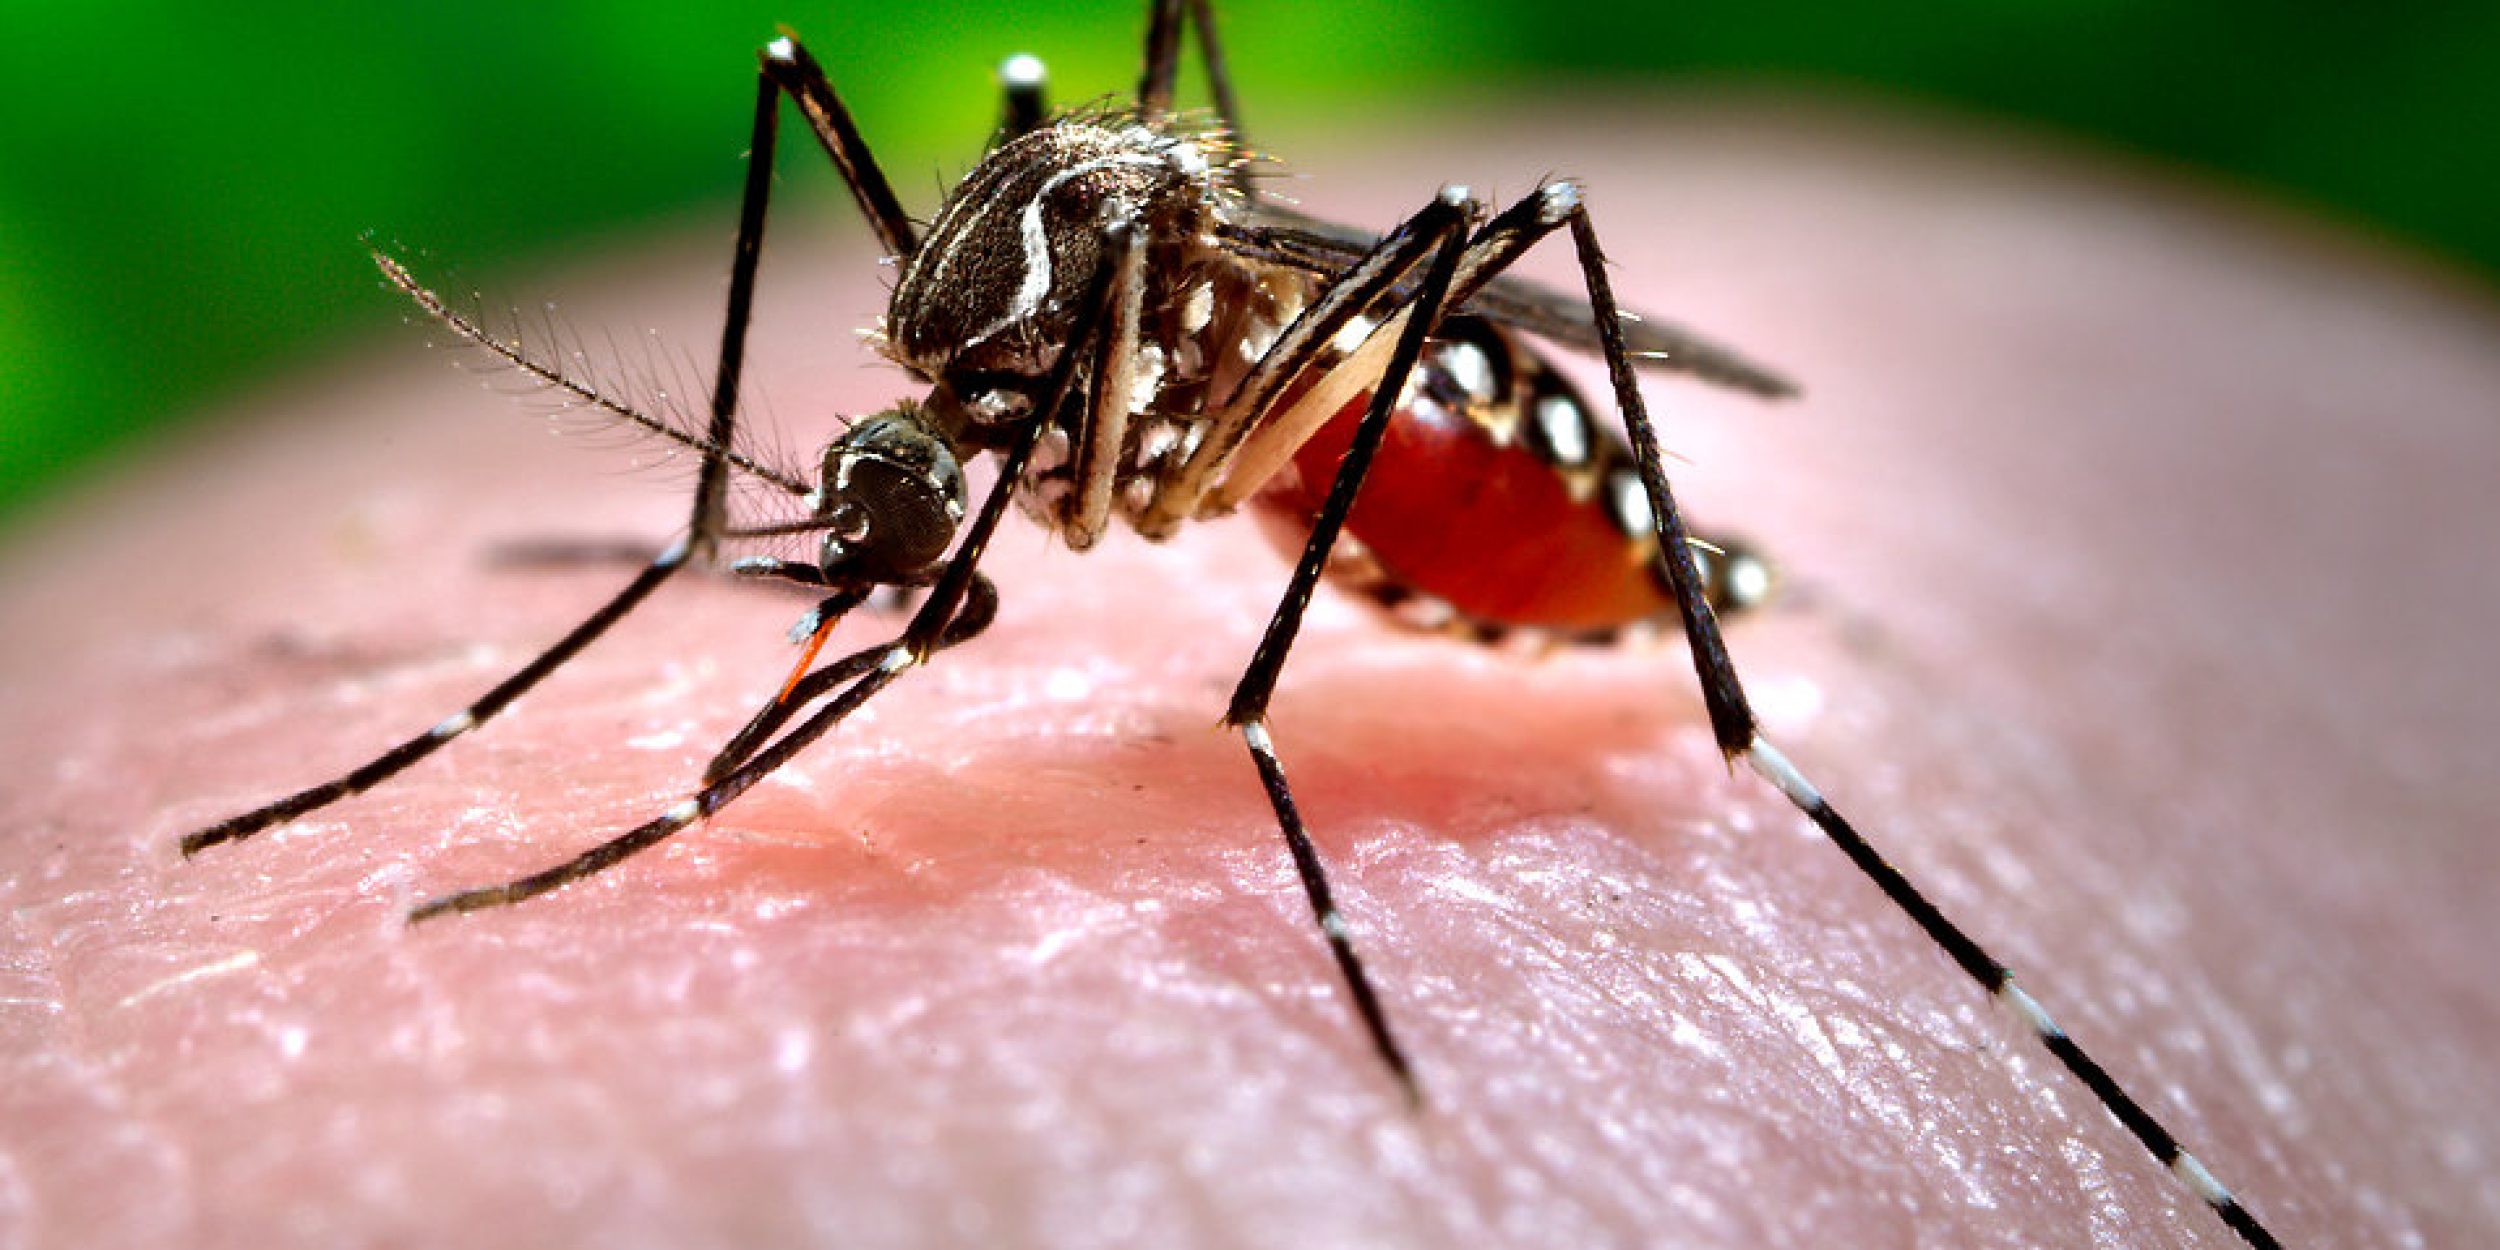 img-16743-close-up-of-a-mosquito-feeding-on-blood-pv